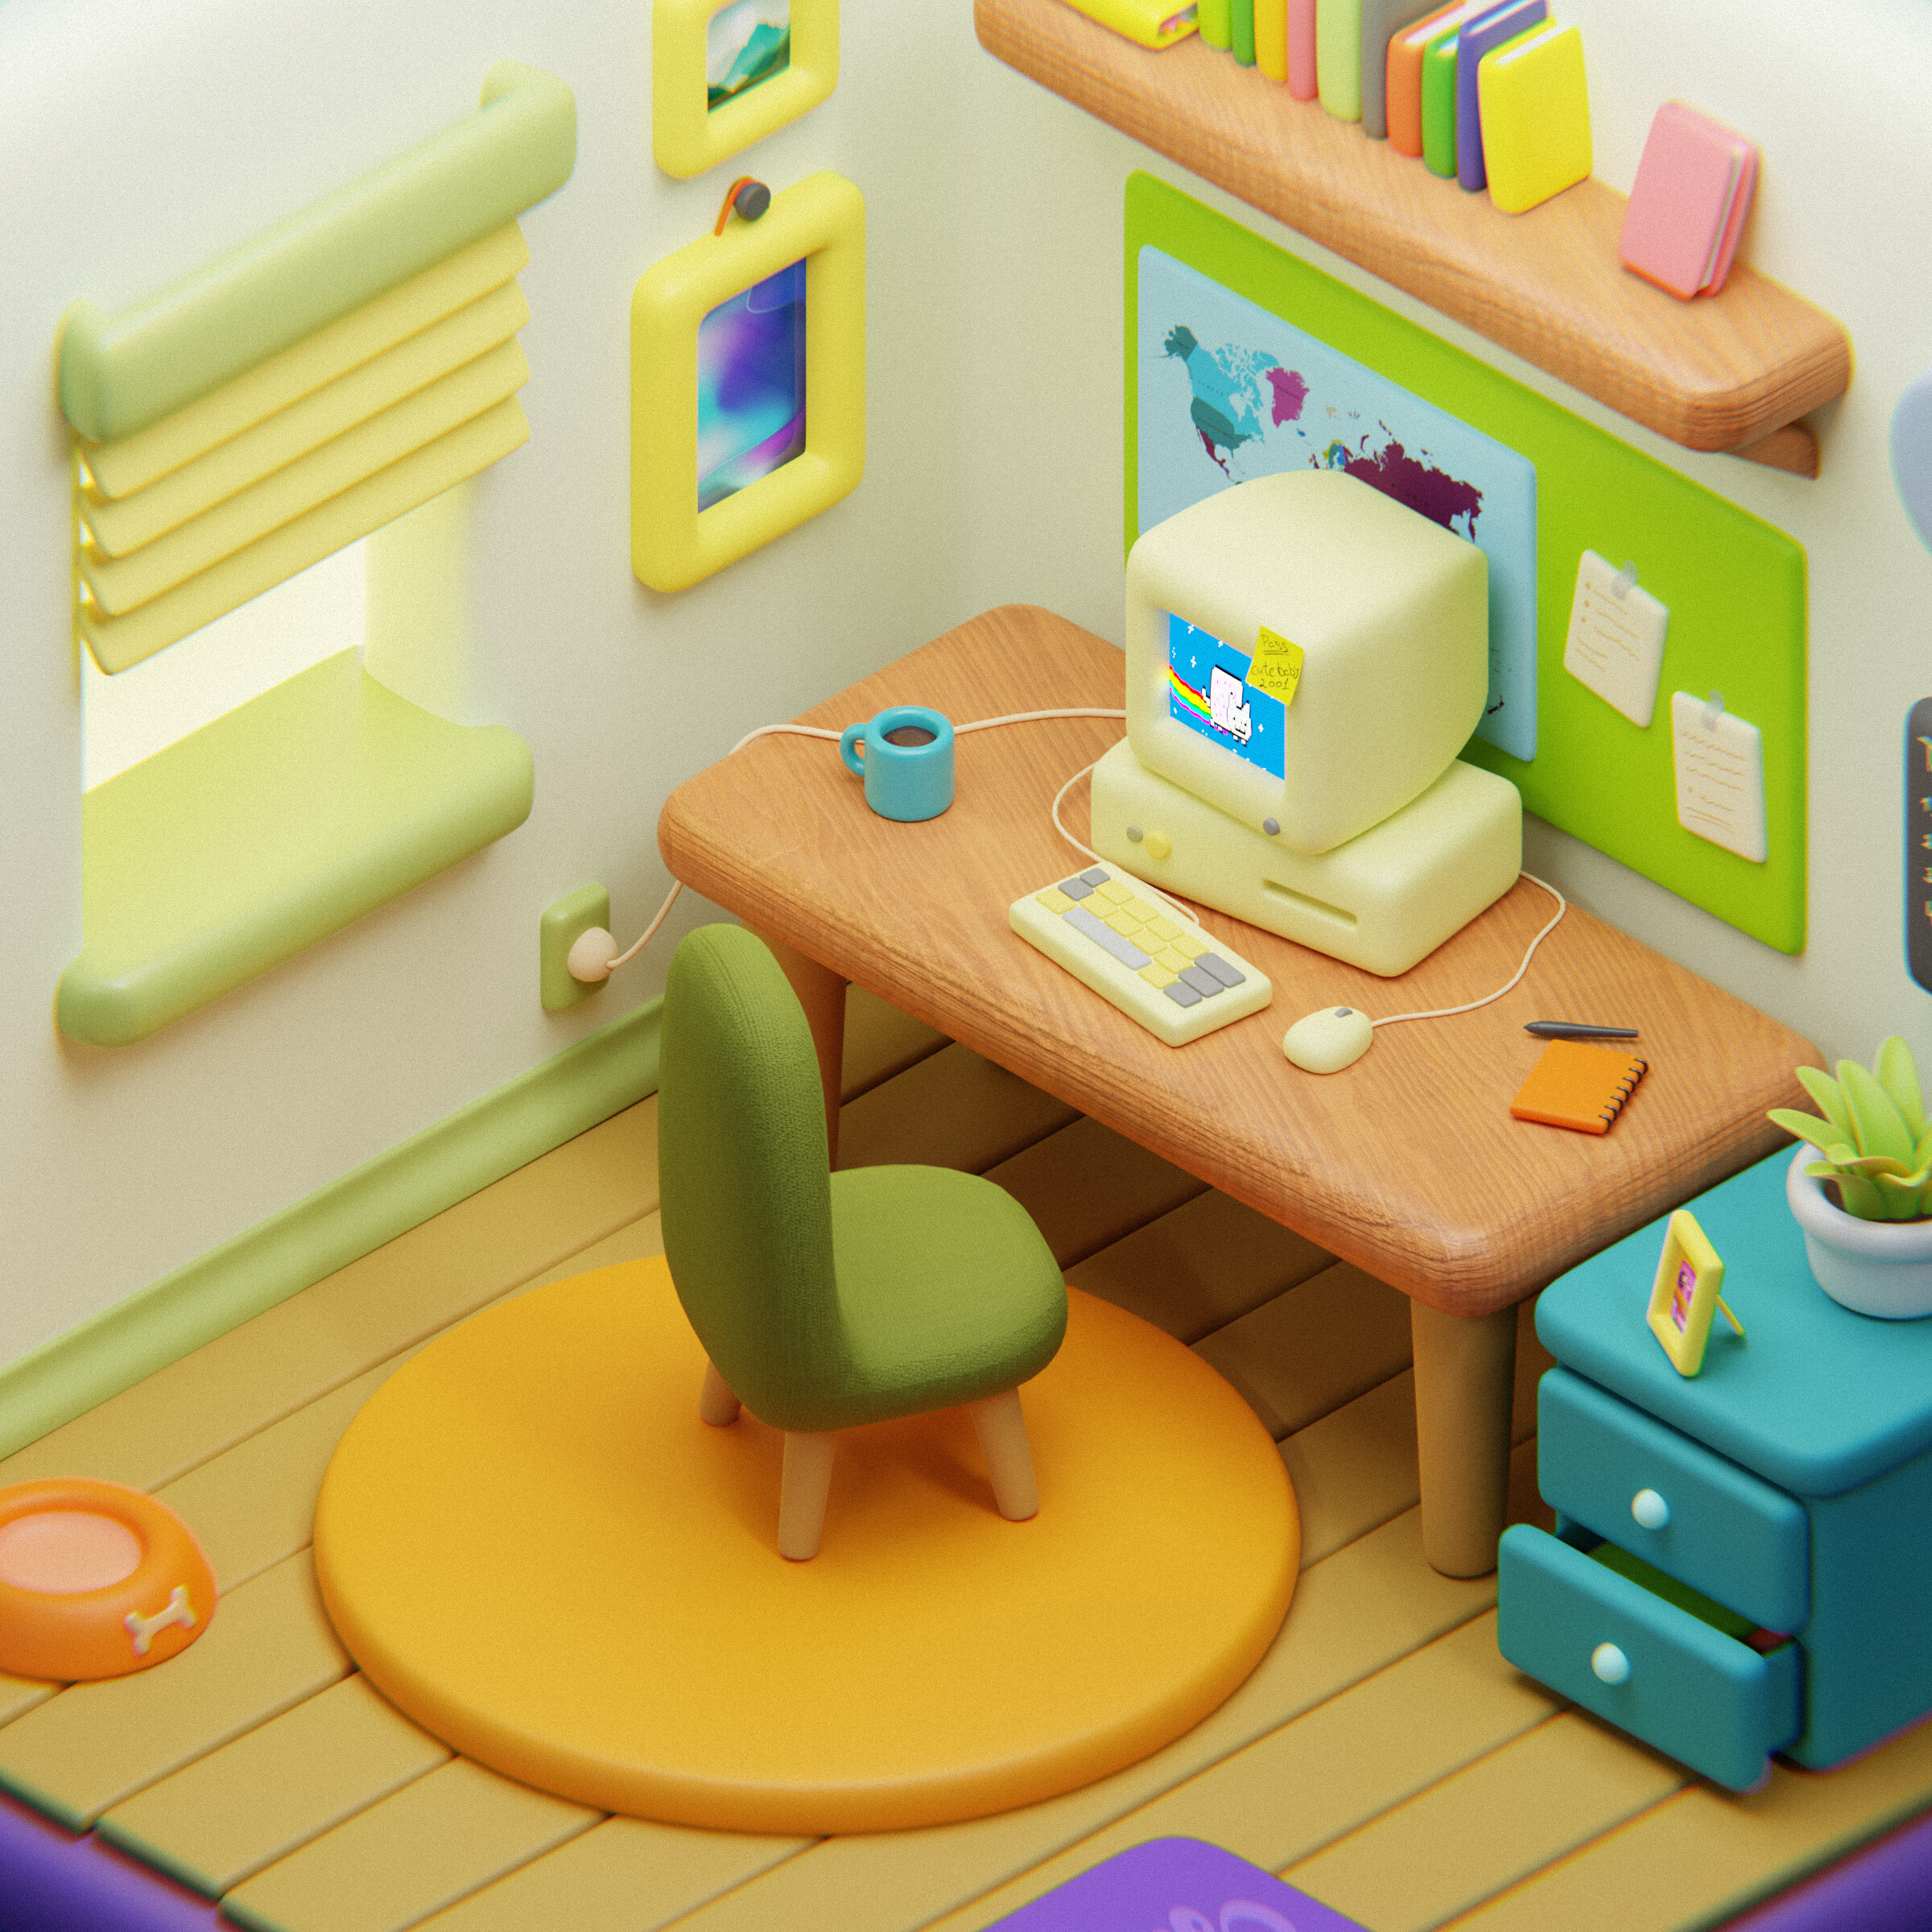 Isometric room - Finished Projects - Blender Artists Community